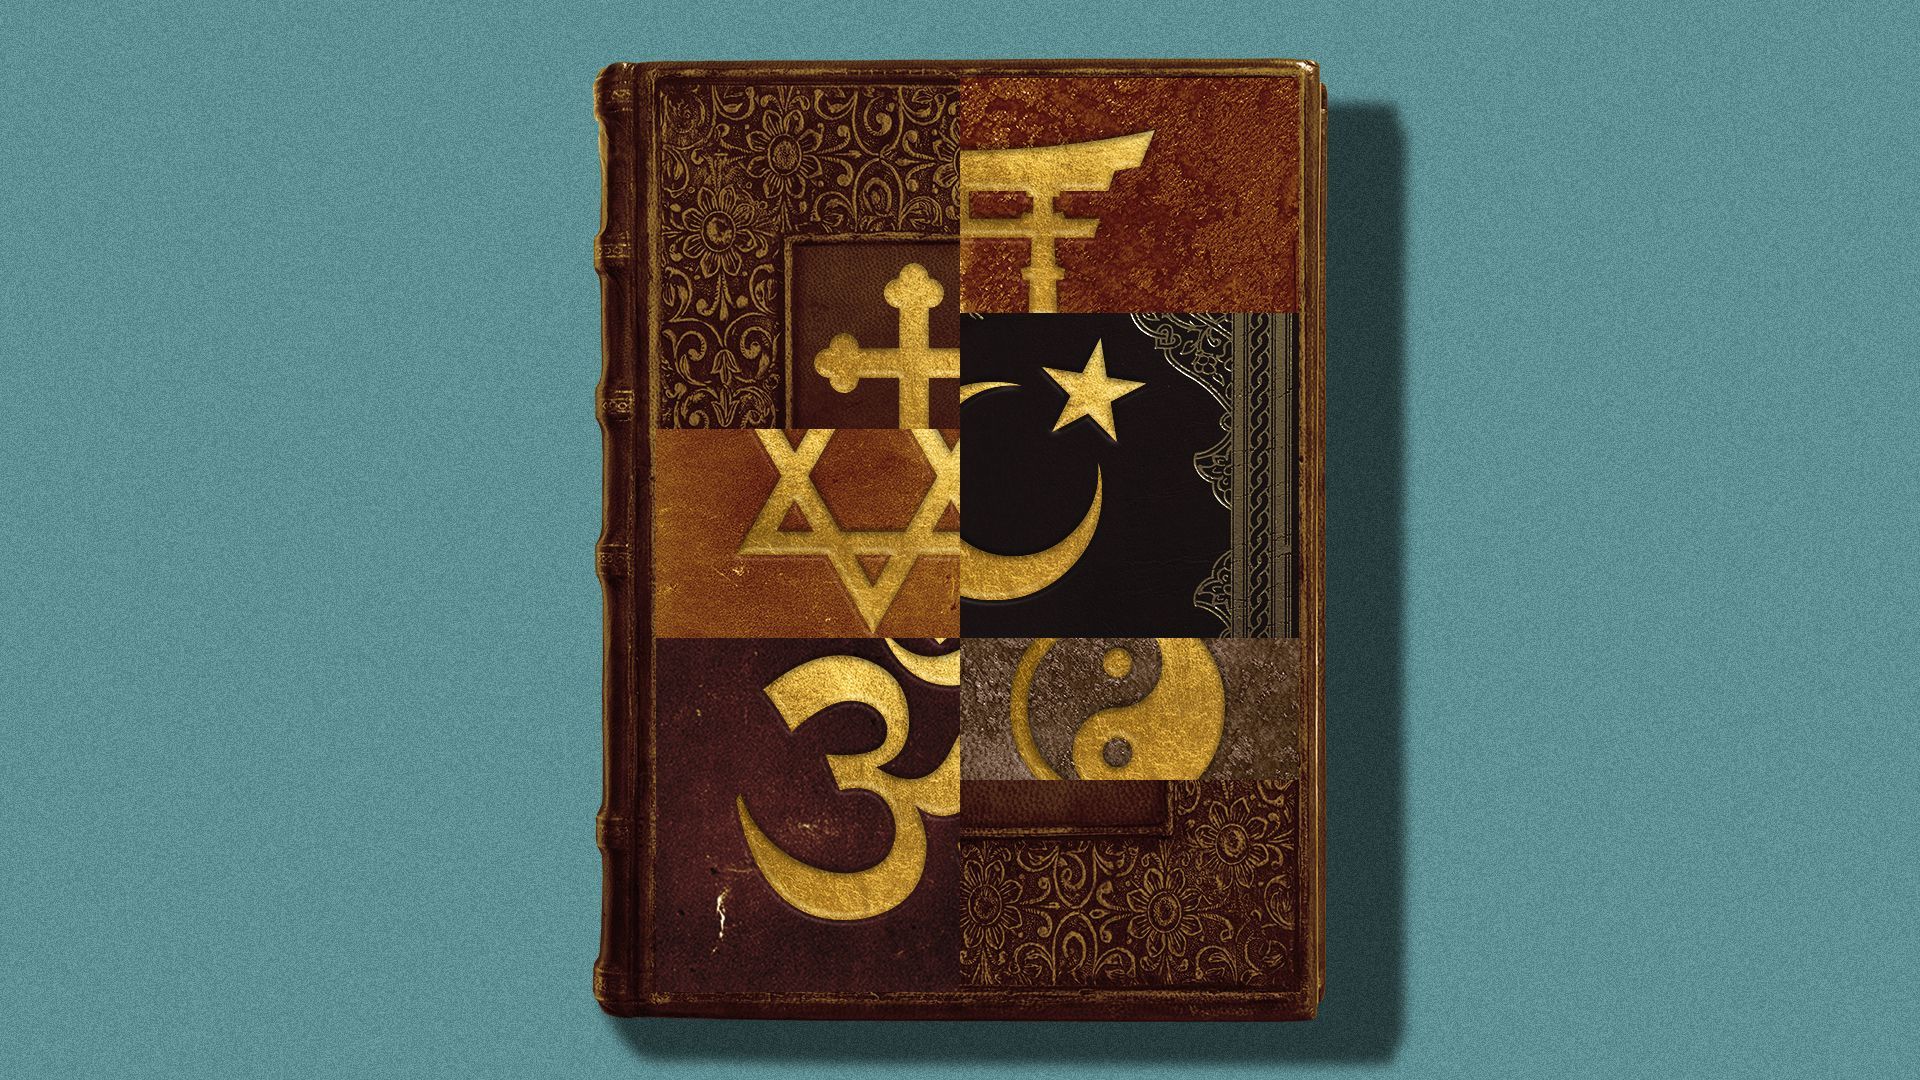 Illustration of a fragmented book cover showing different religious symbols.